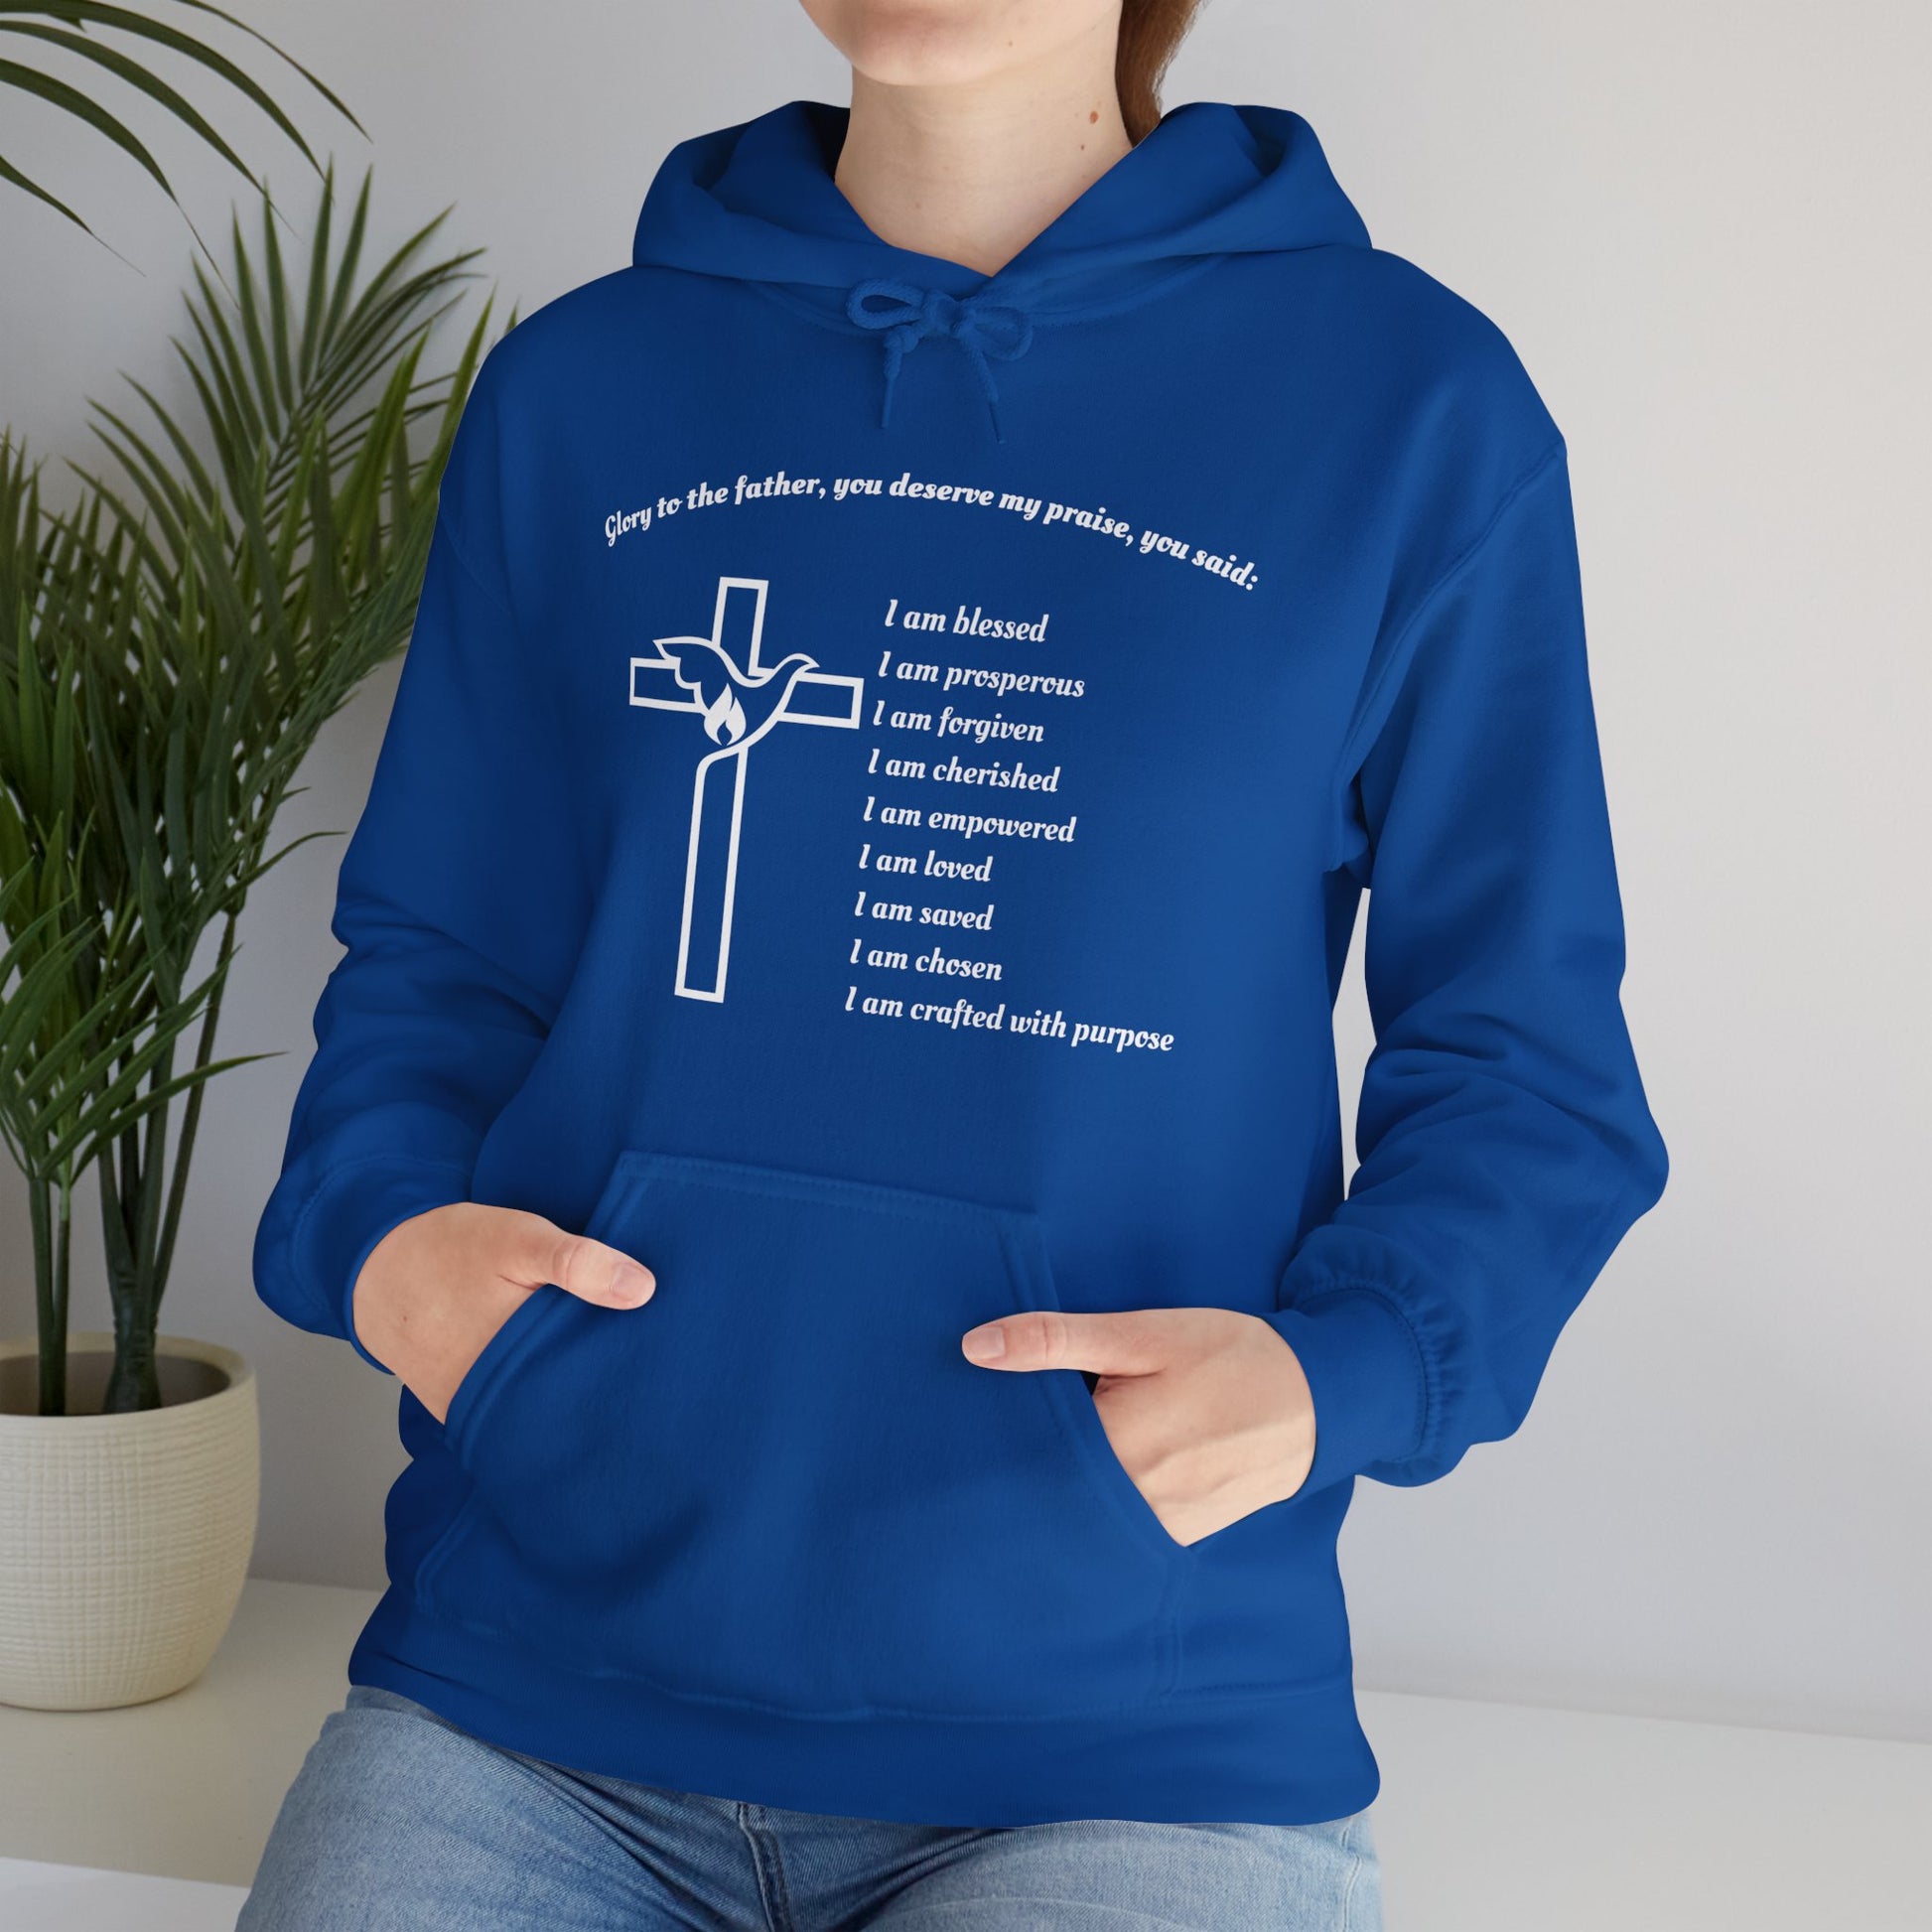 I am Glory to the Father Hooded Sweatshirt Unisex Cozy Heavy Blend43